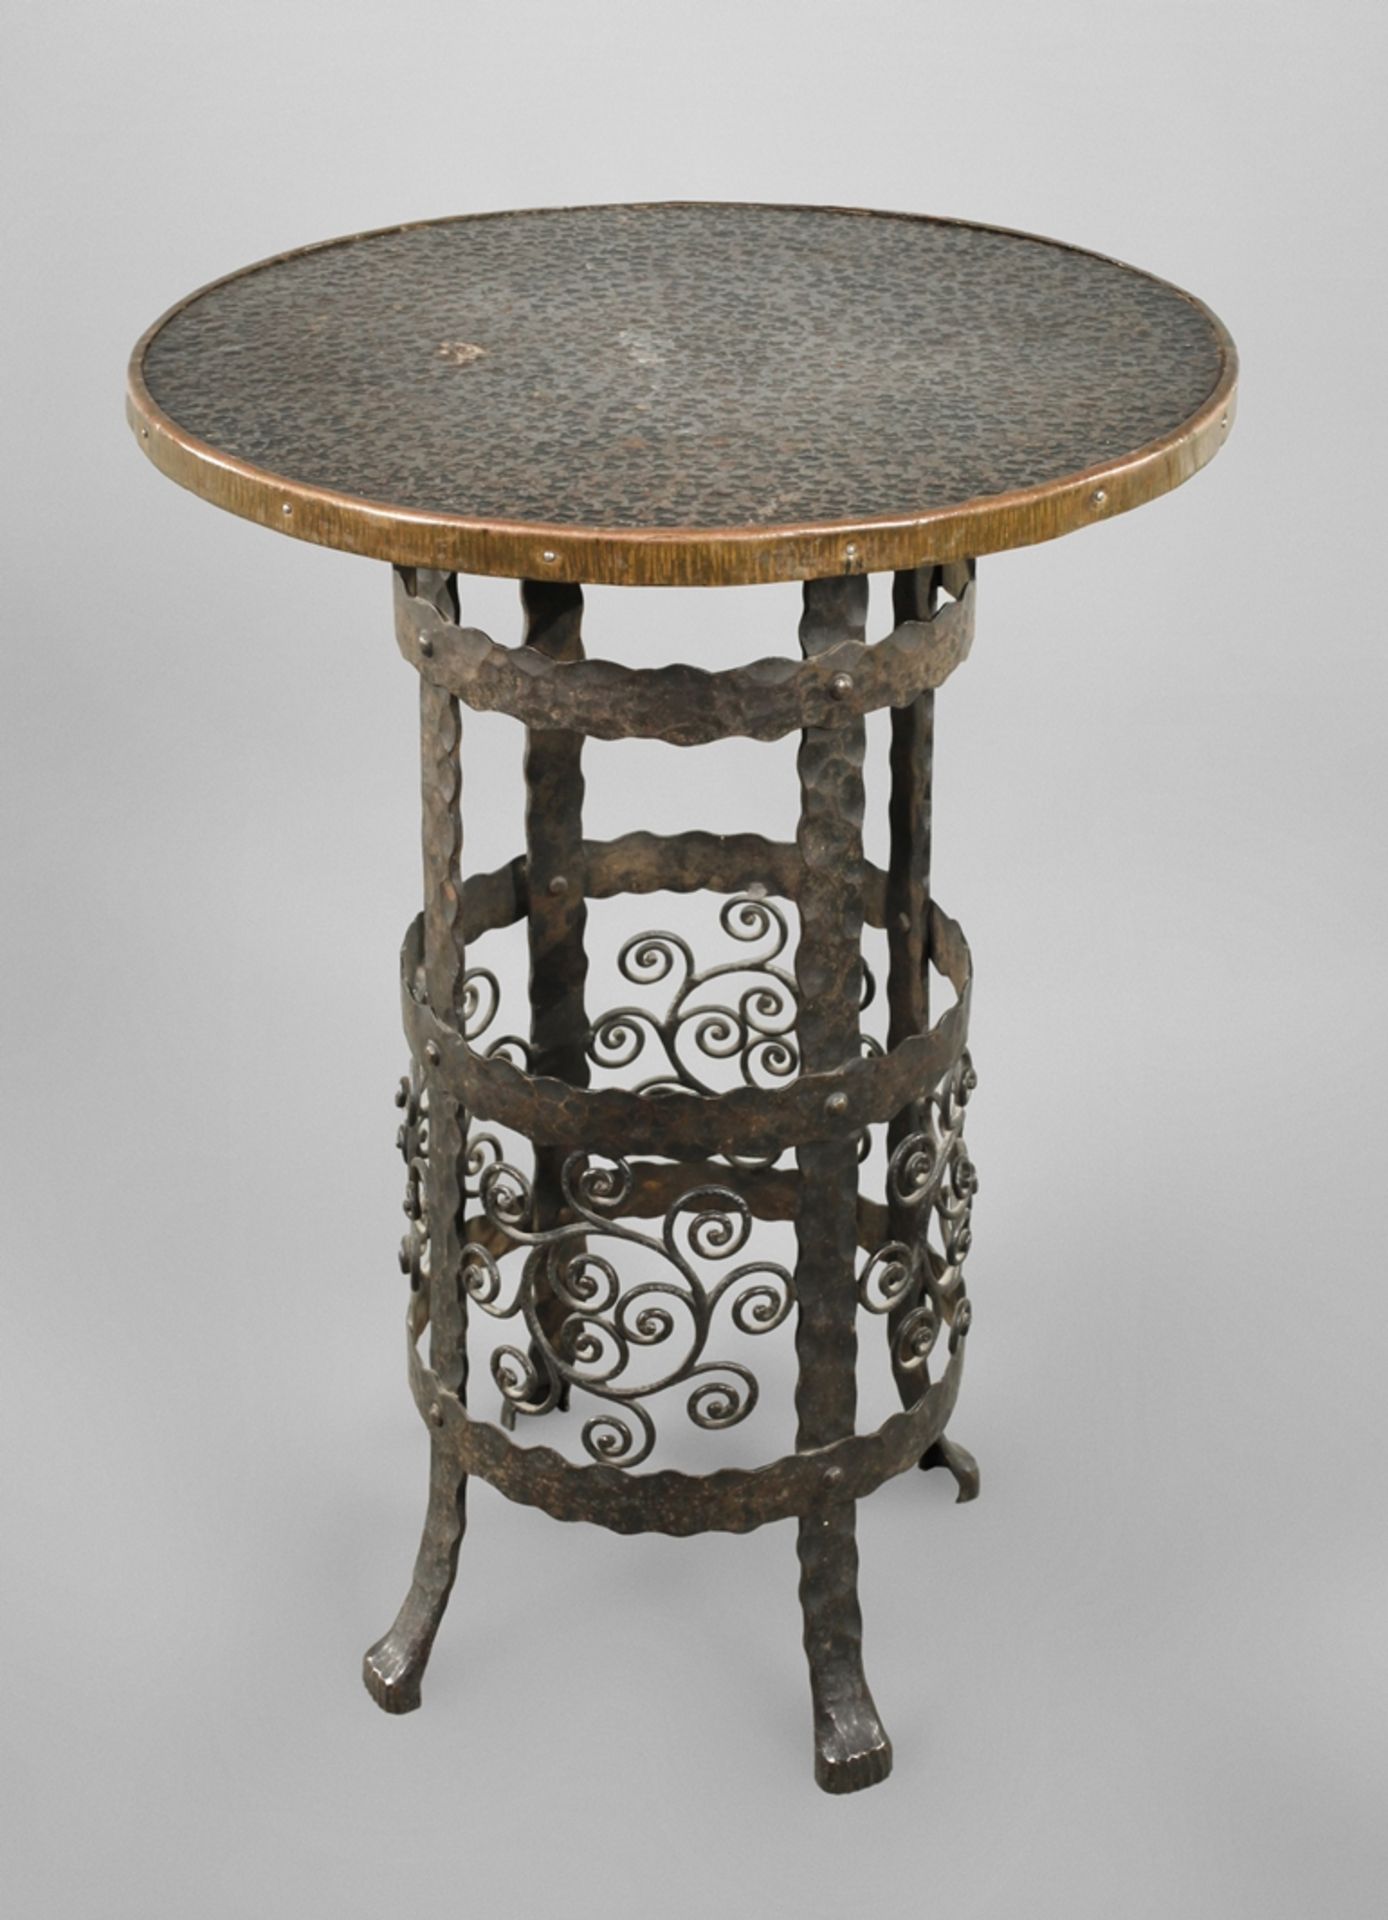 Wrought iron flower table